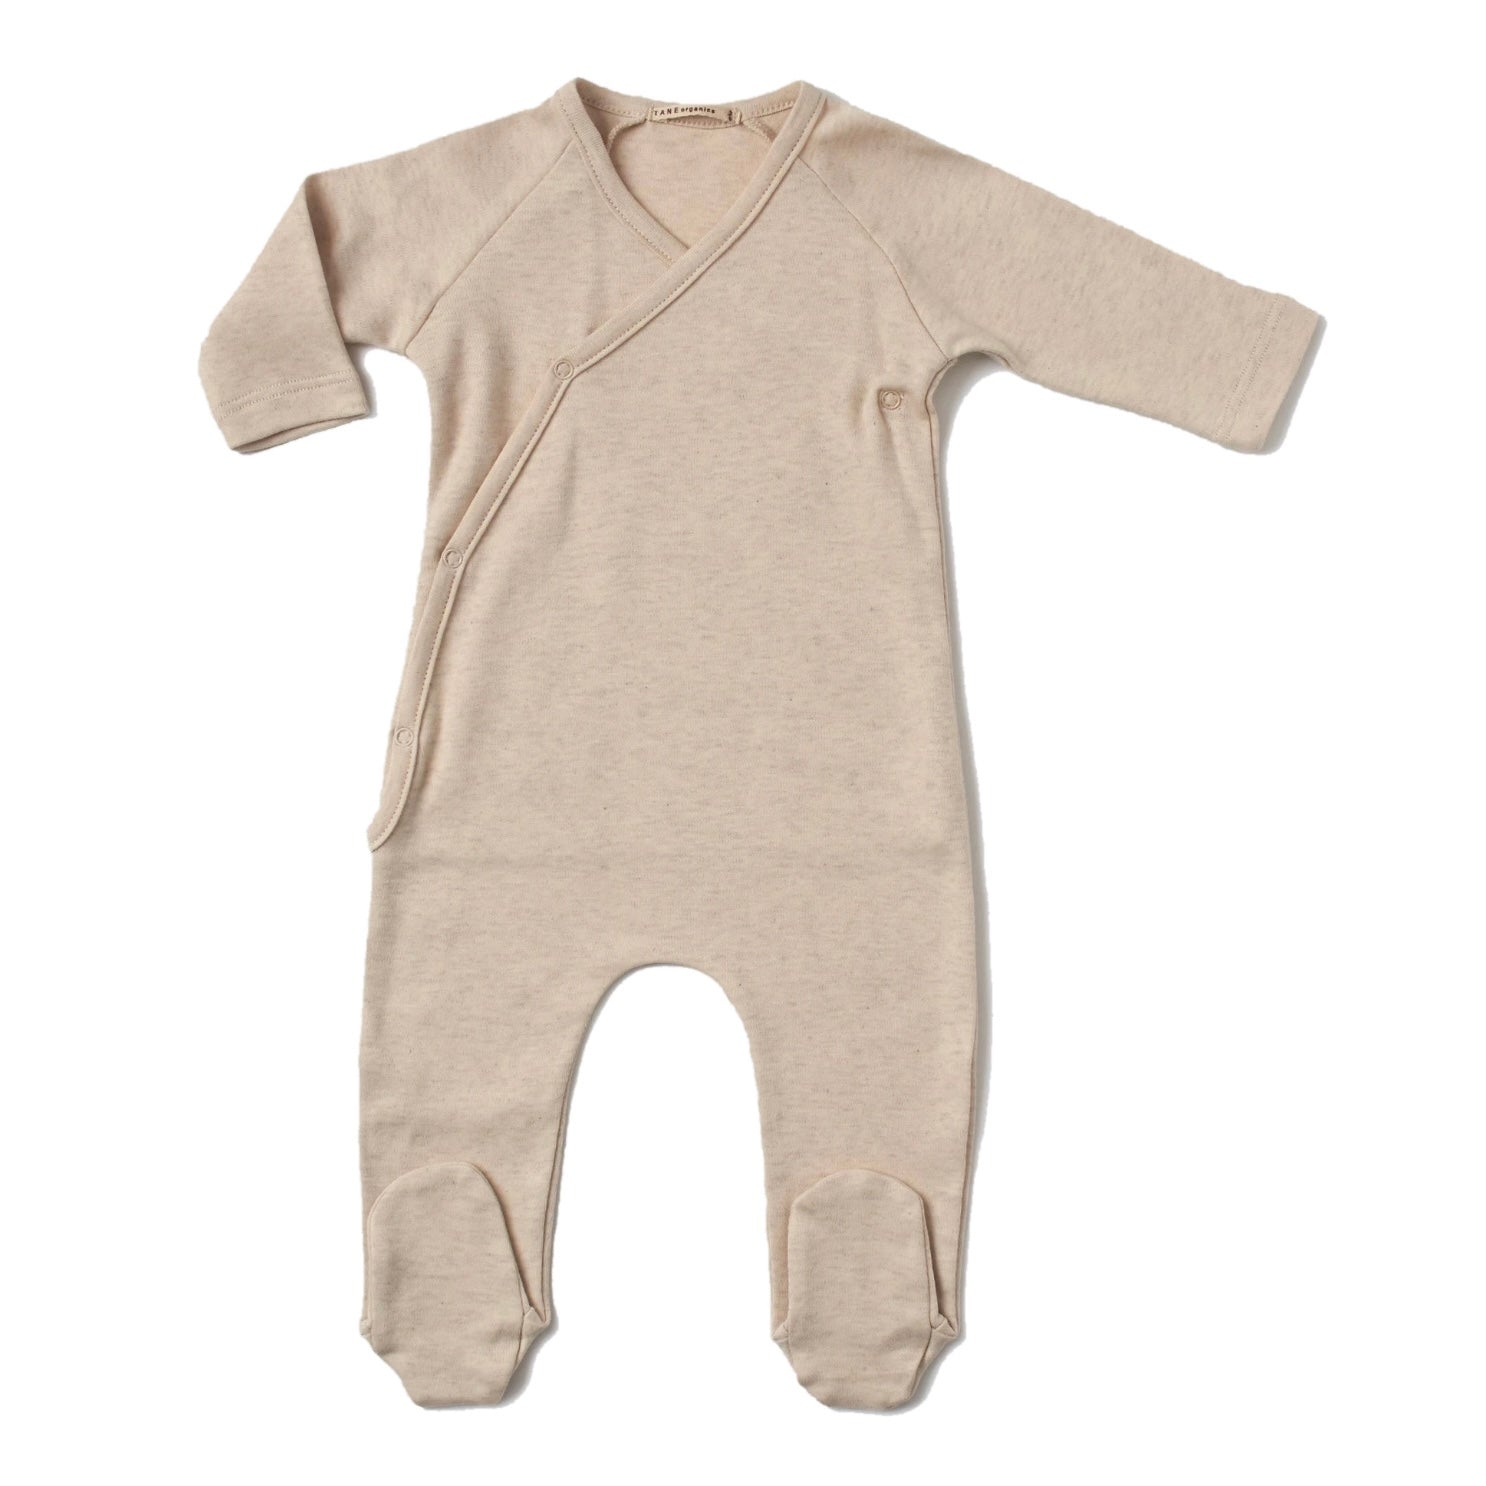 V-Neck Footie in Brushed Heathered Knit